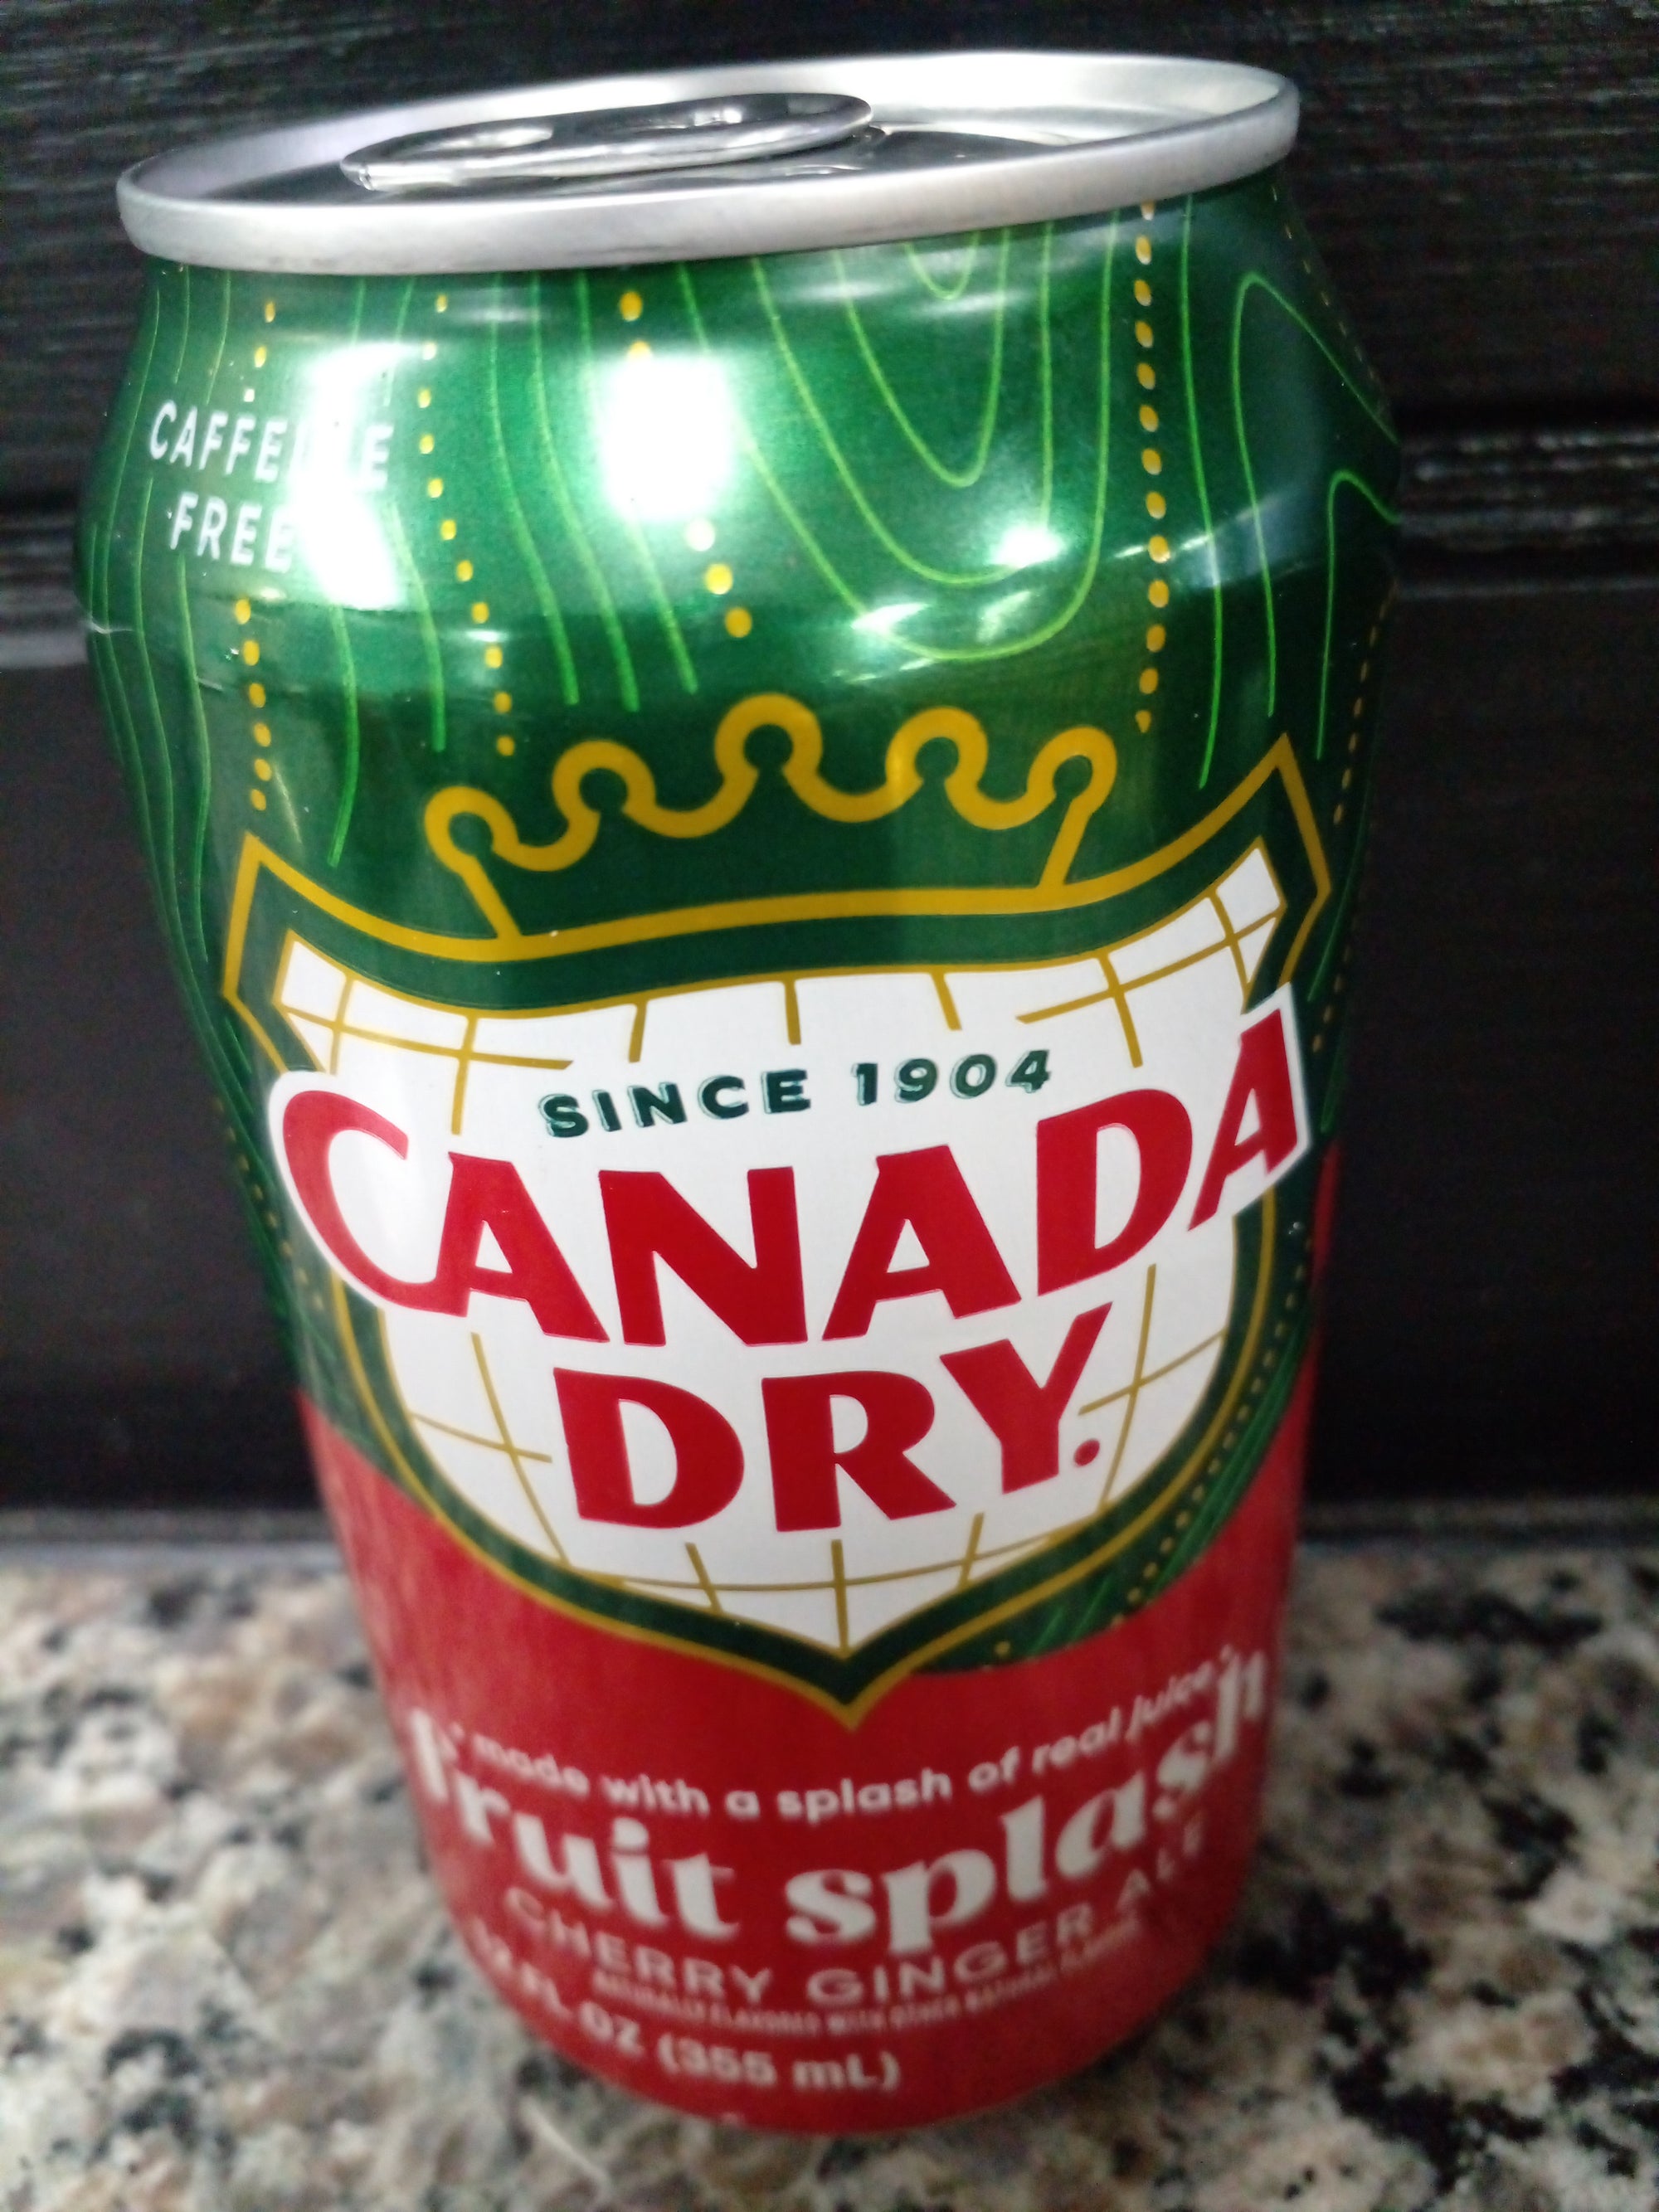 CANADA DRY Fruit Splash Cherry Ginger Ale 355ml can